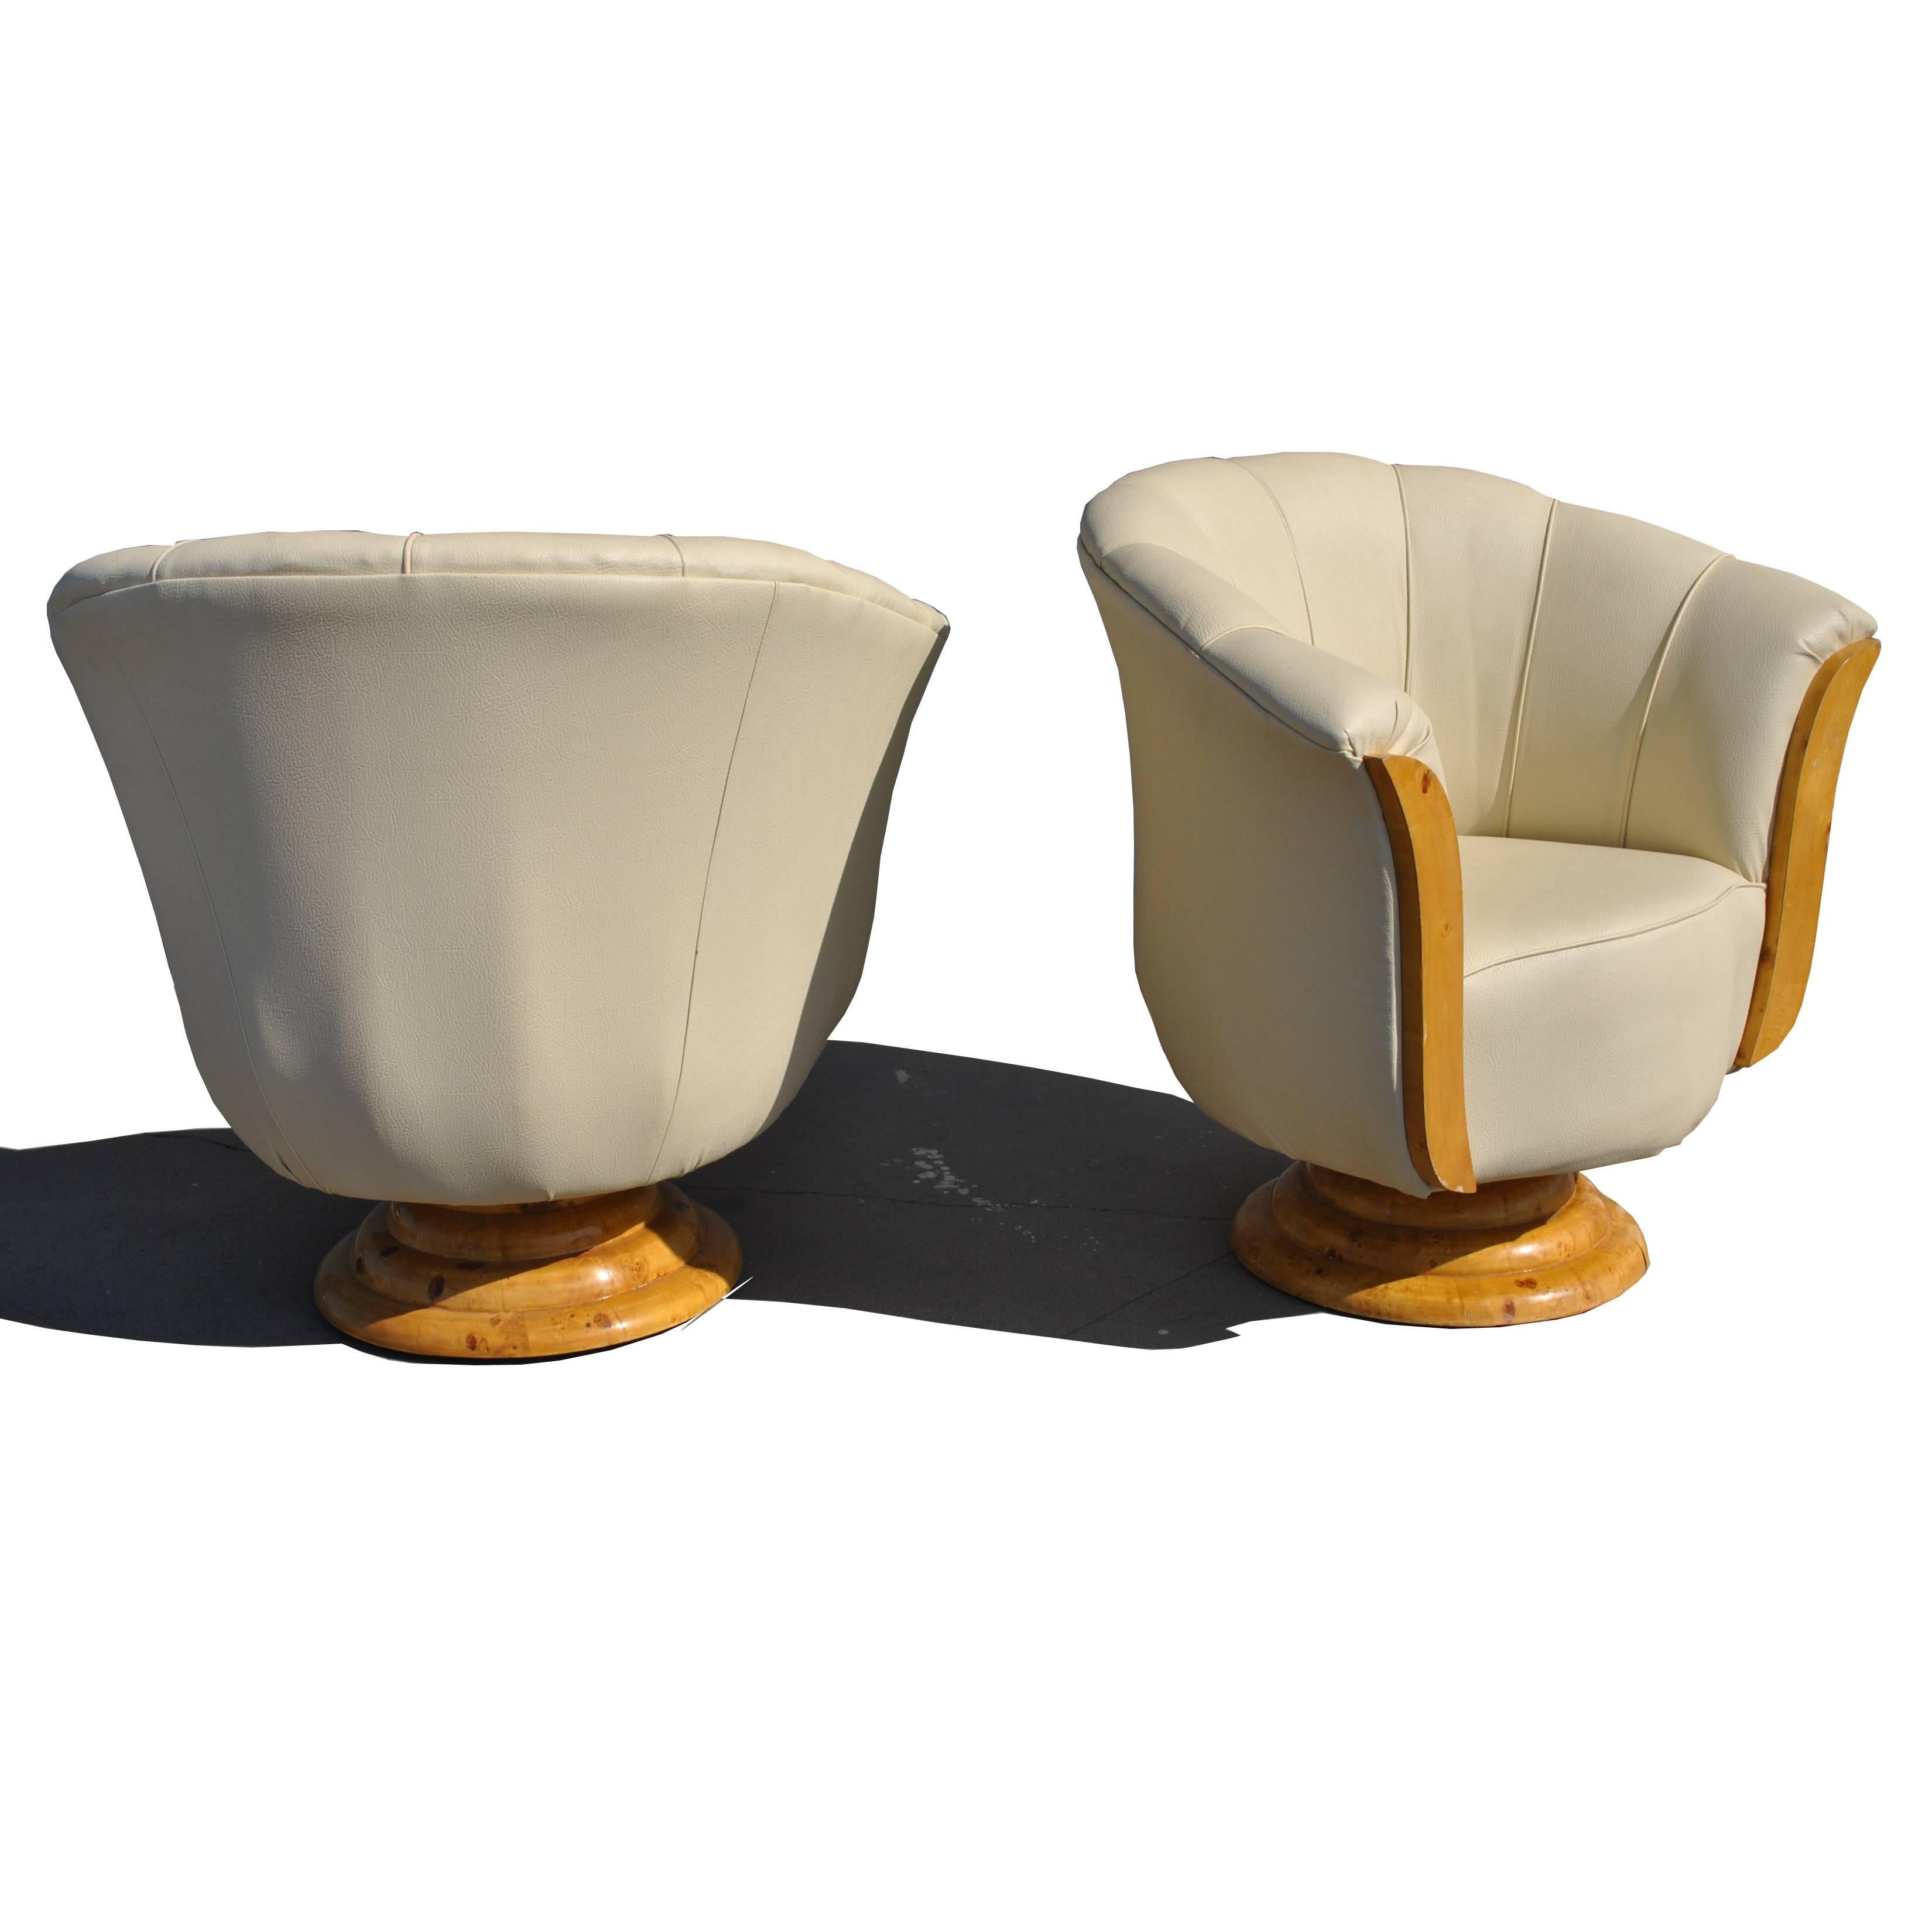 Pair of French Art Deco Style Burled Lounge Chairs 3